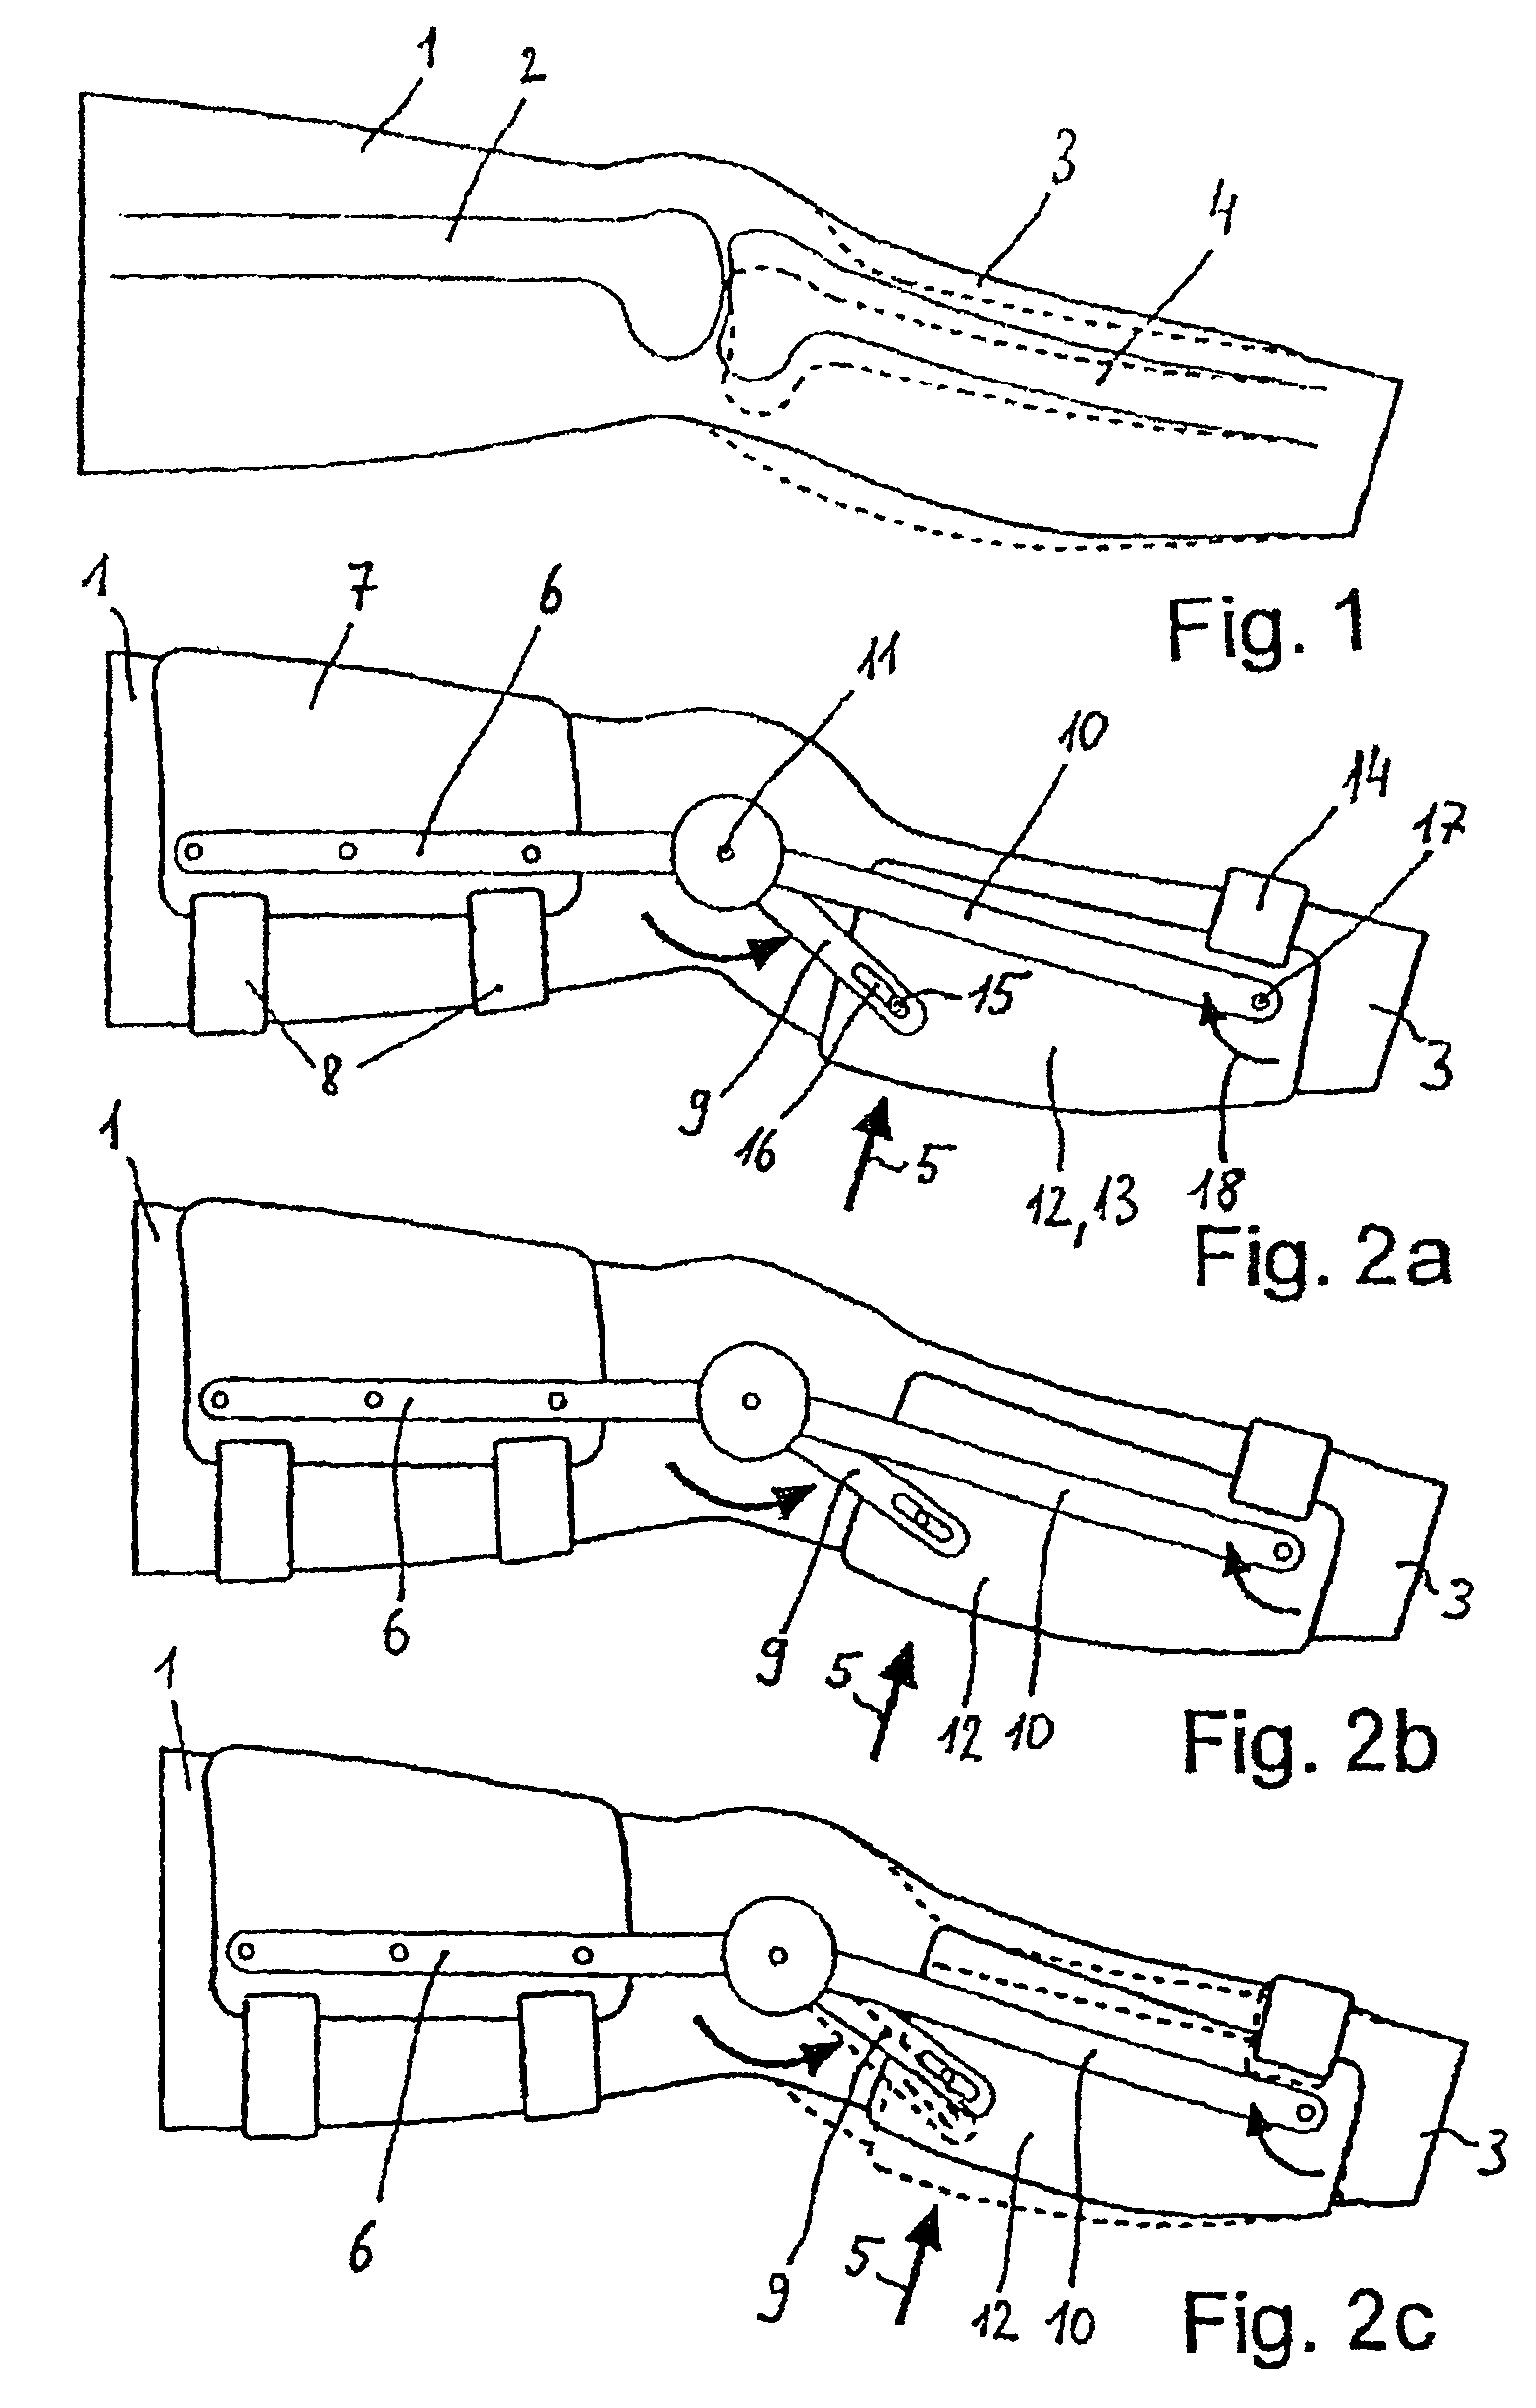 Device for applying a ventrally or dorsally directed translatory force in the area of a knee joint